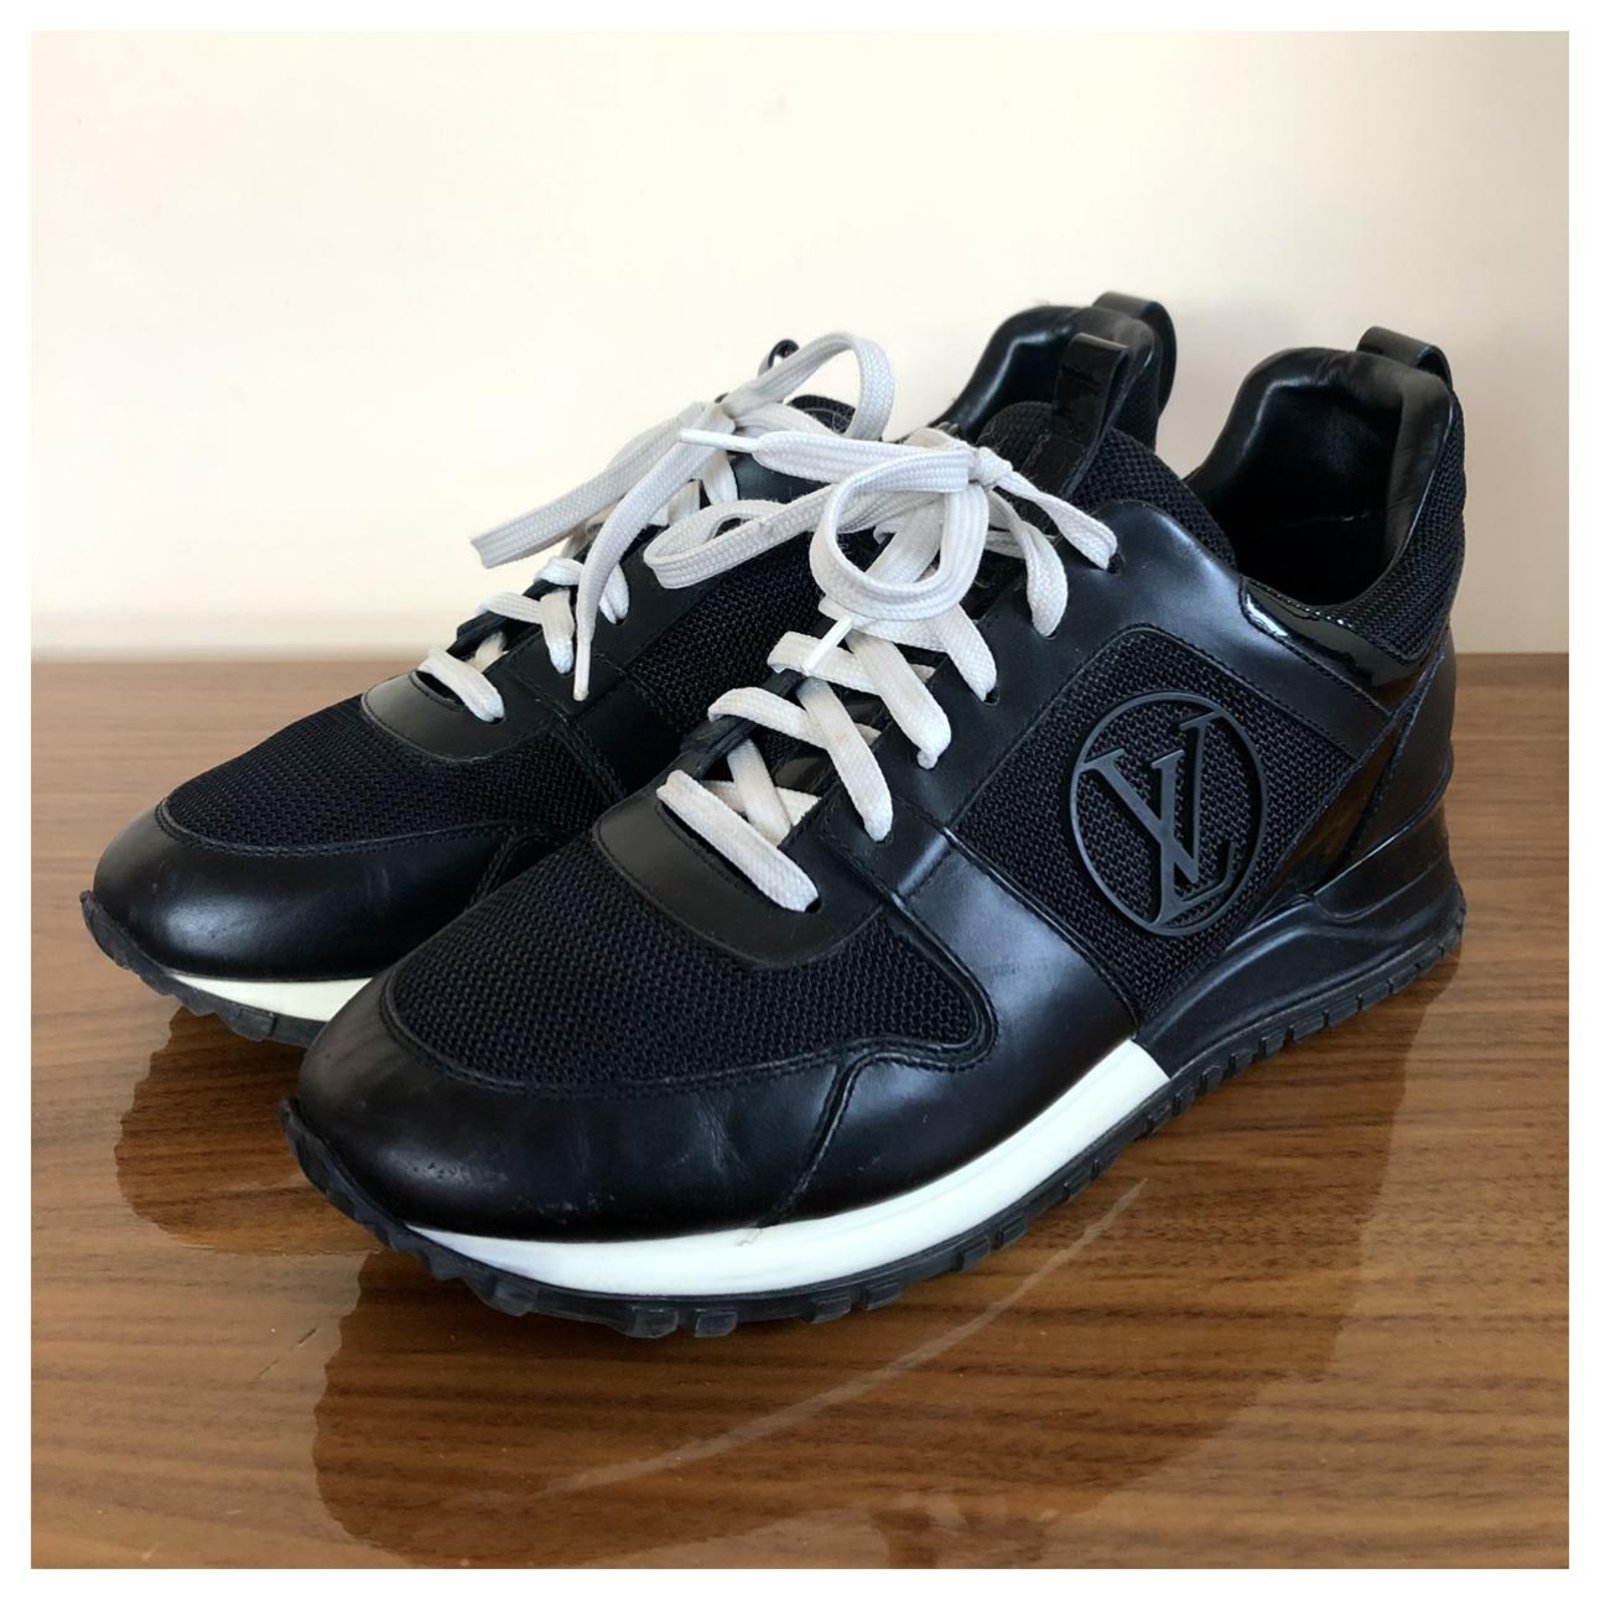 Run away leather trainers Louis Vuitton Black size 40 EU in Leather -  28978834